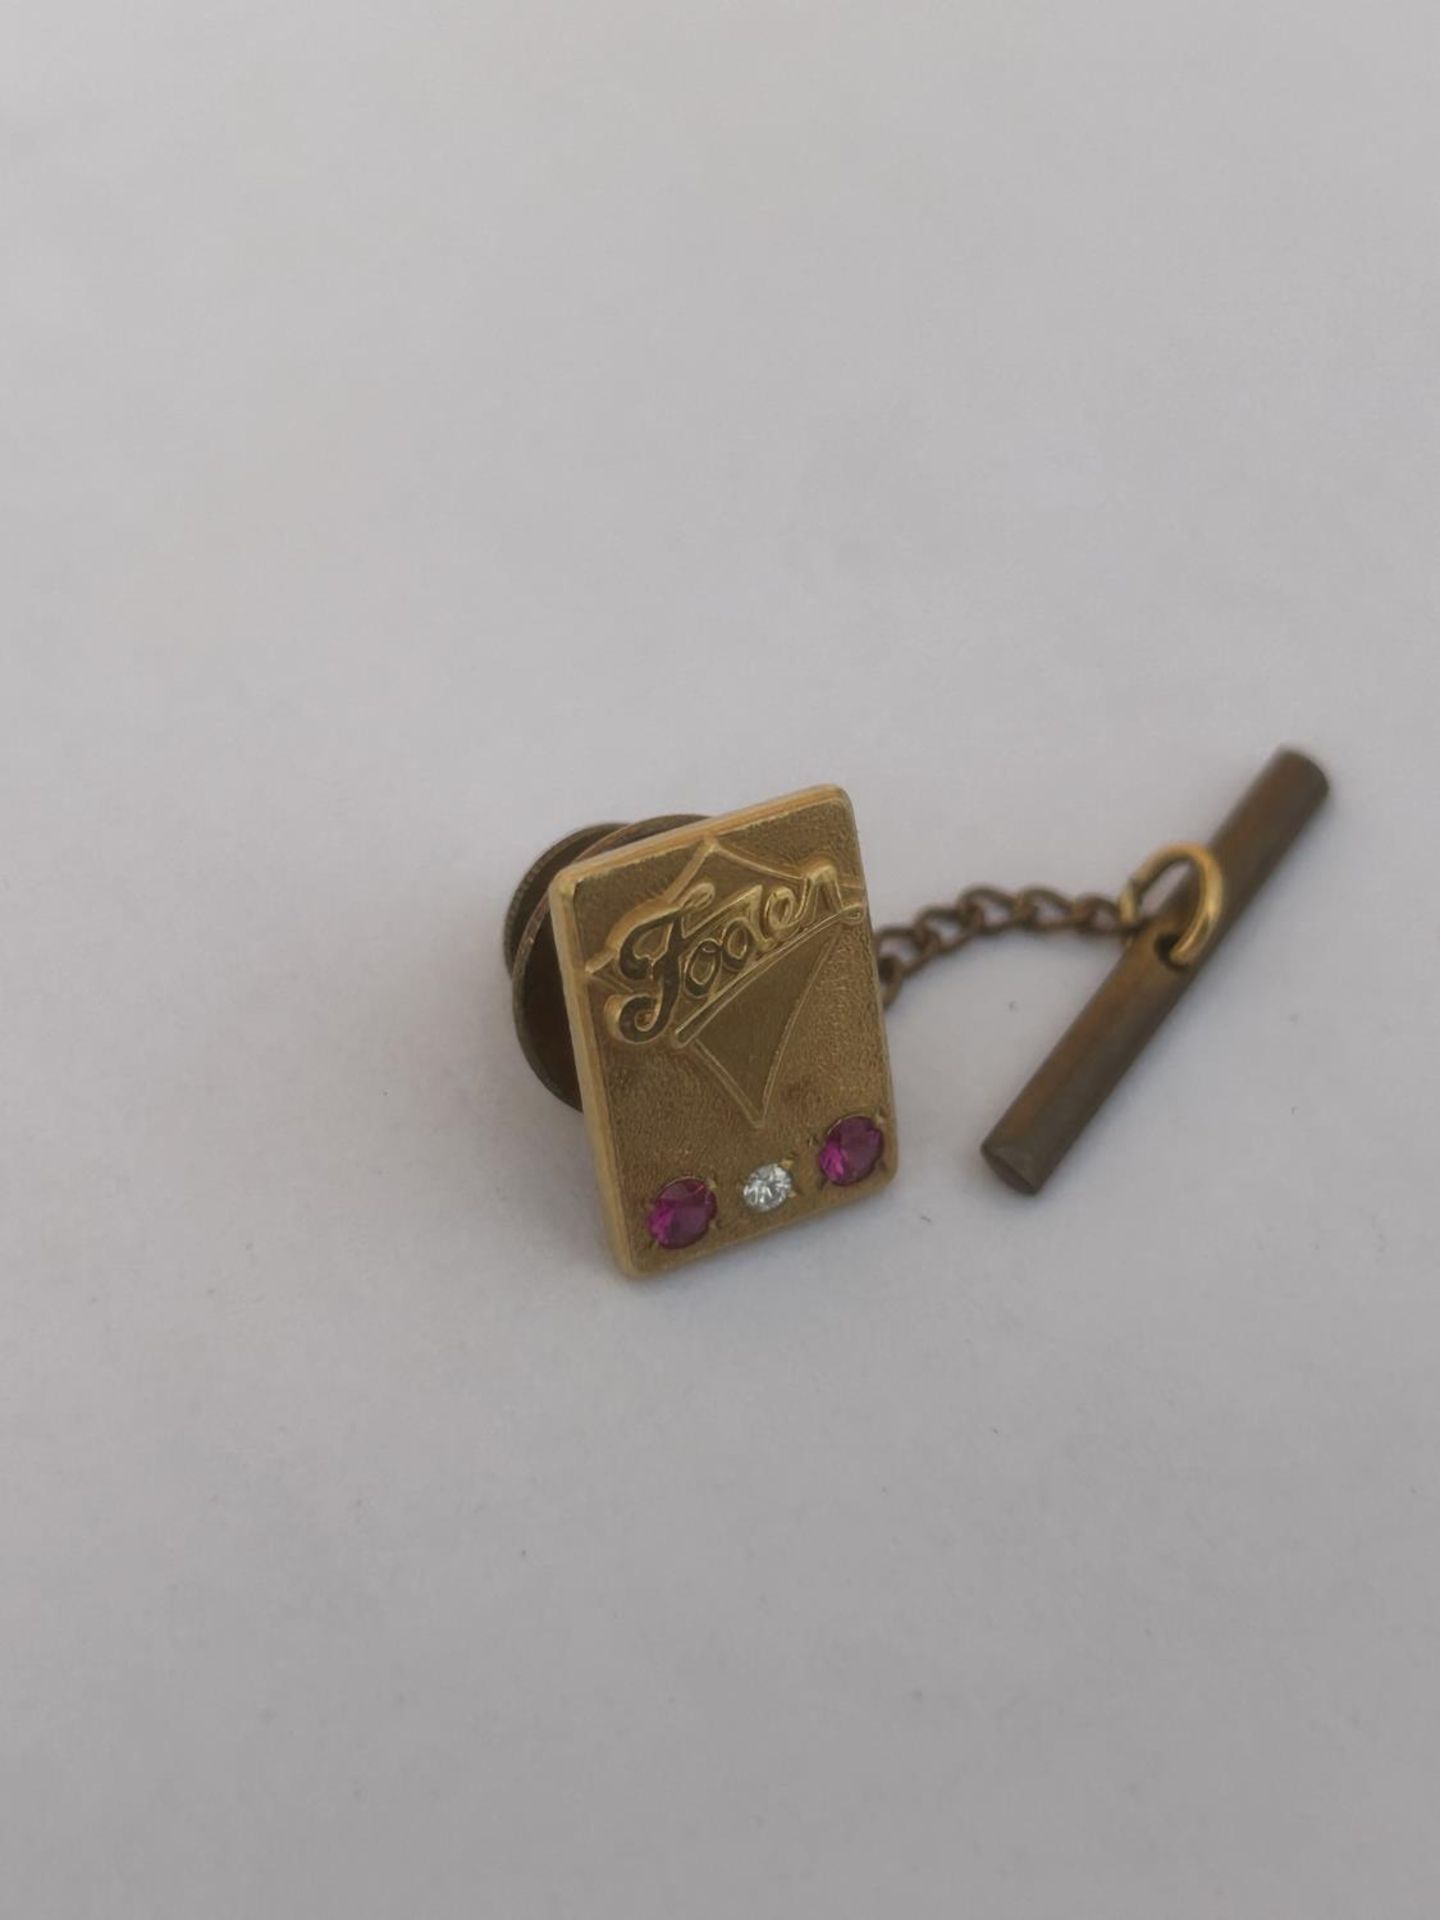 A HALLMARKED 9CT GOLD DIAMOND AND RUBY FODEN TRUCKS PIN BADGE GROSS WEIGHT 4.84 G - Image 2 of 4